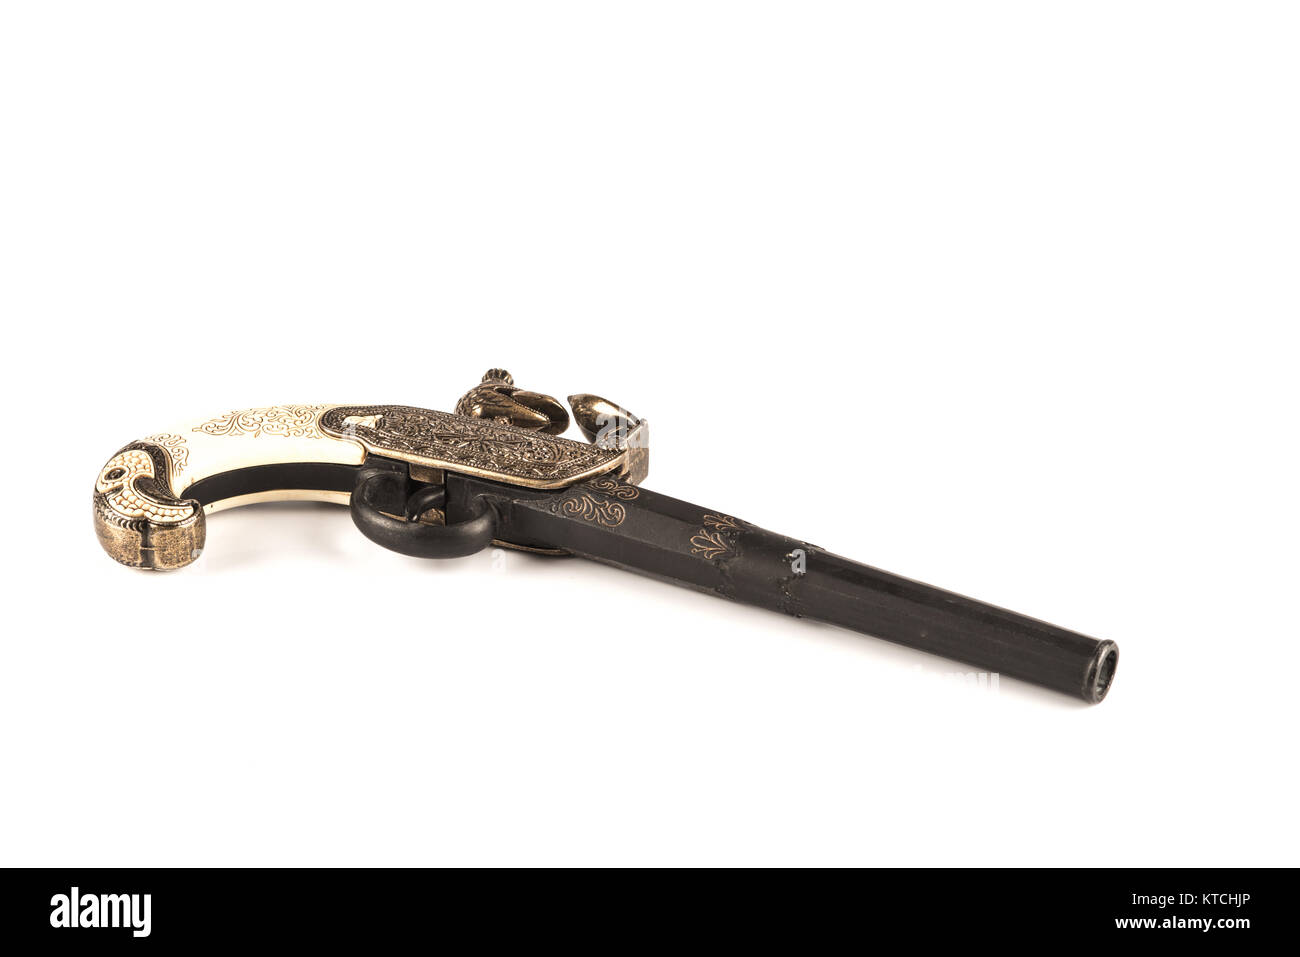 Flintlock pistol with engraved handle over a white background Stock Photo